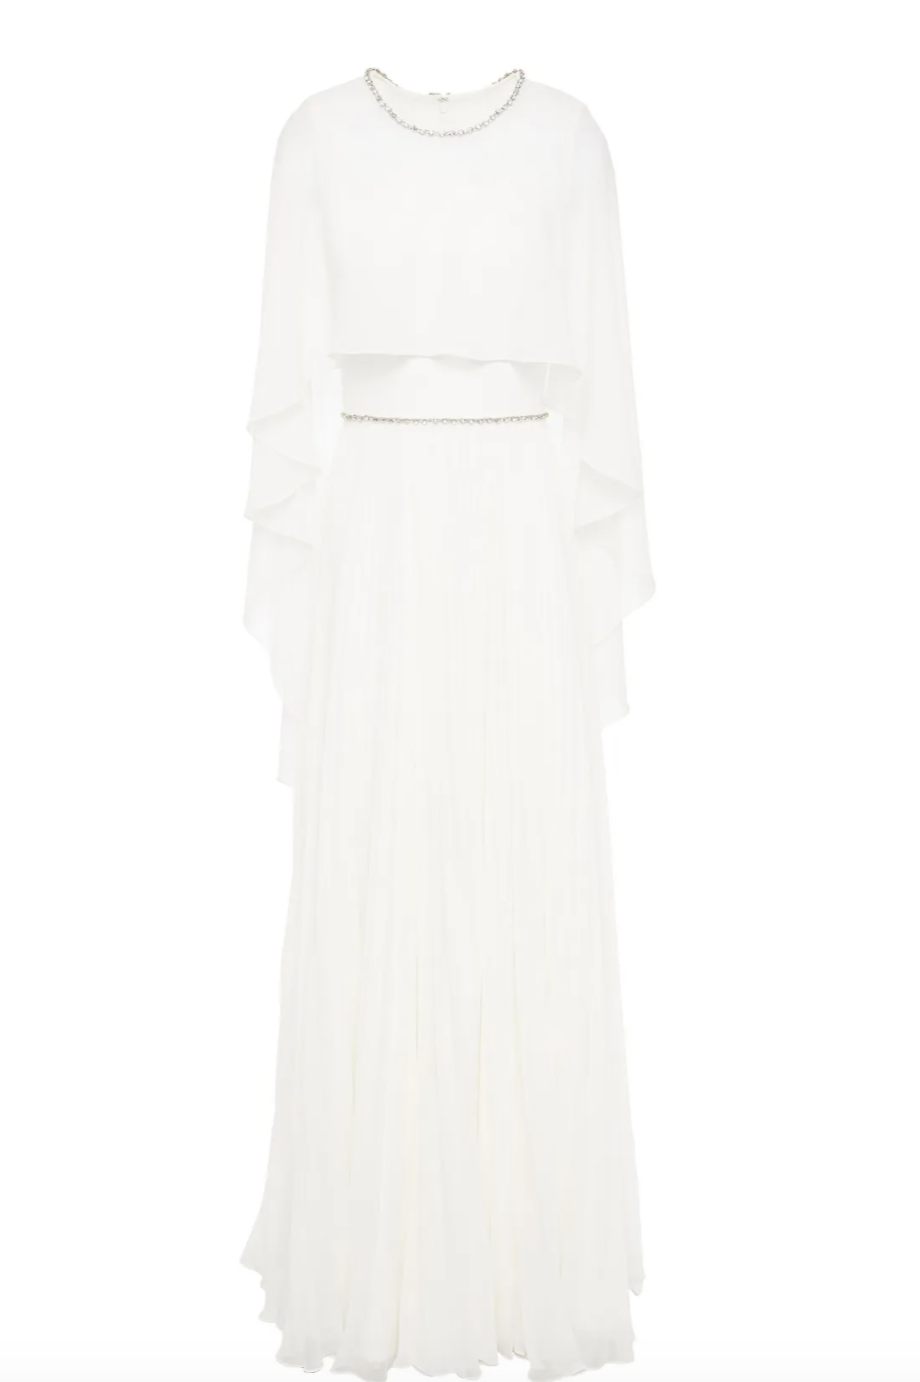 THE OUTNET x Jenny Packham Debut a Glamorous Bridal Collection